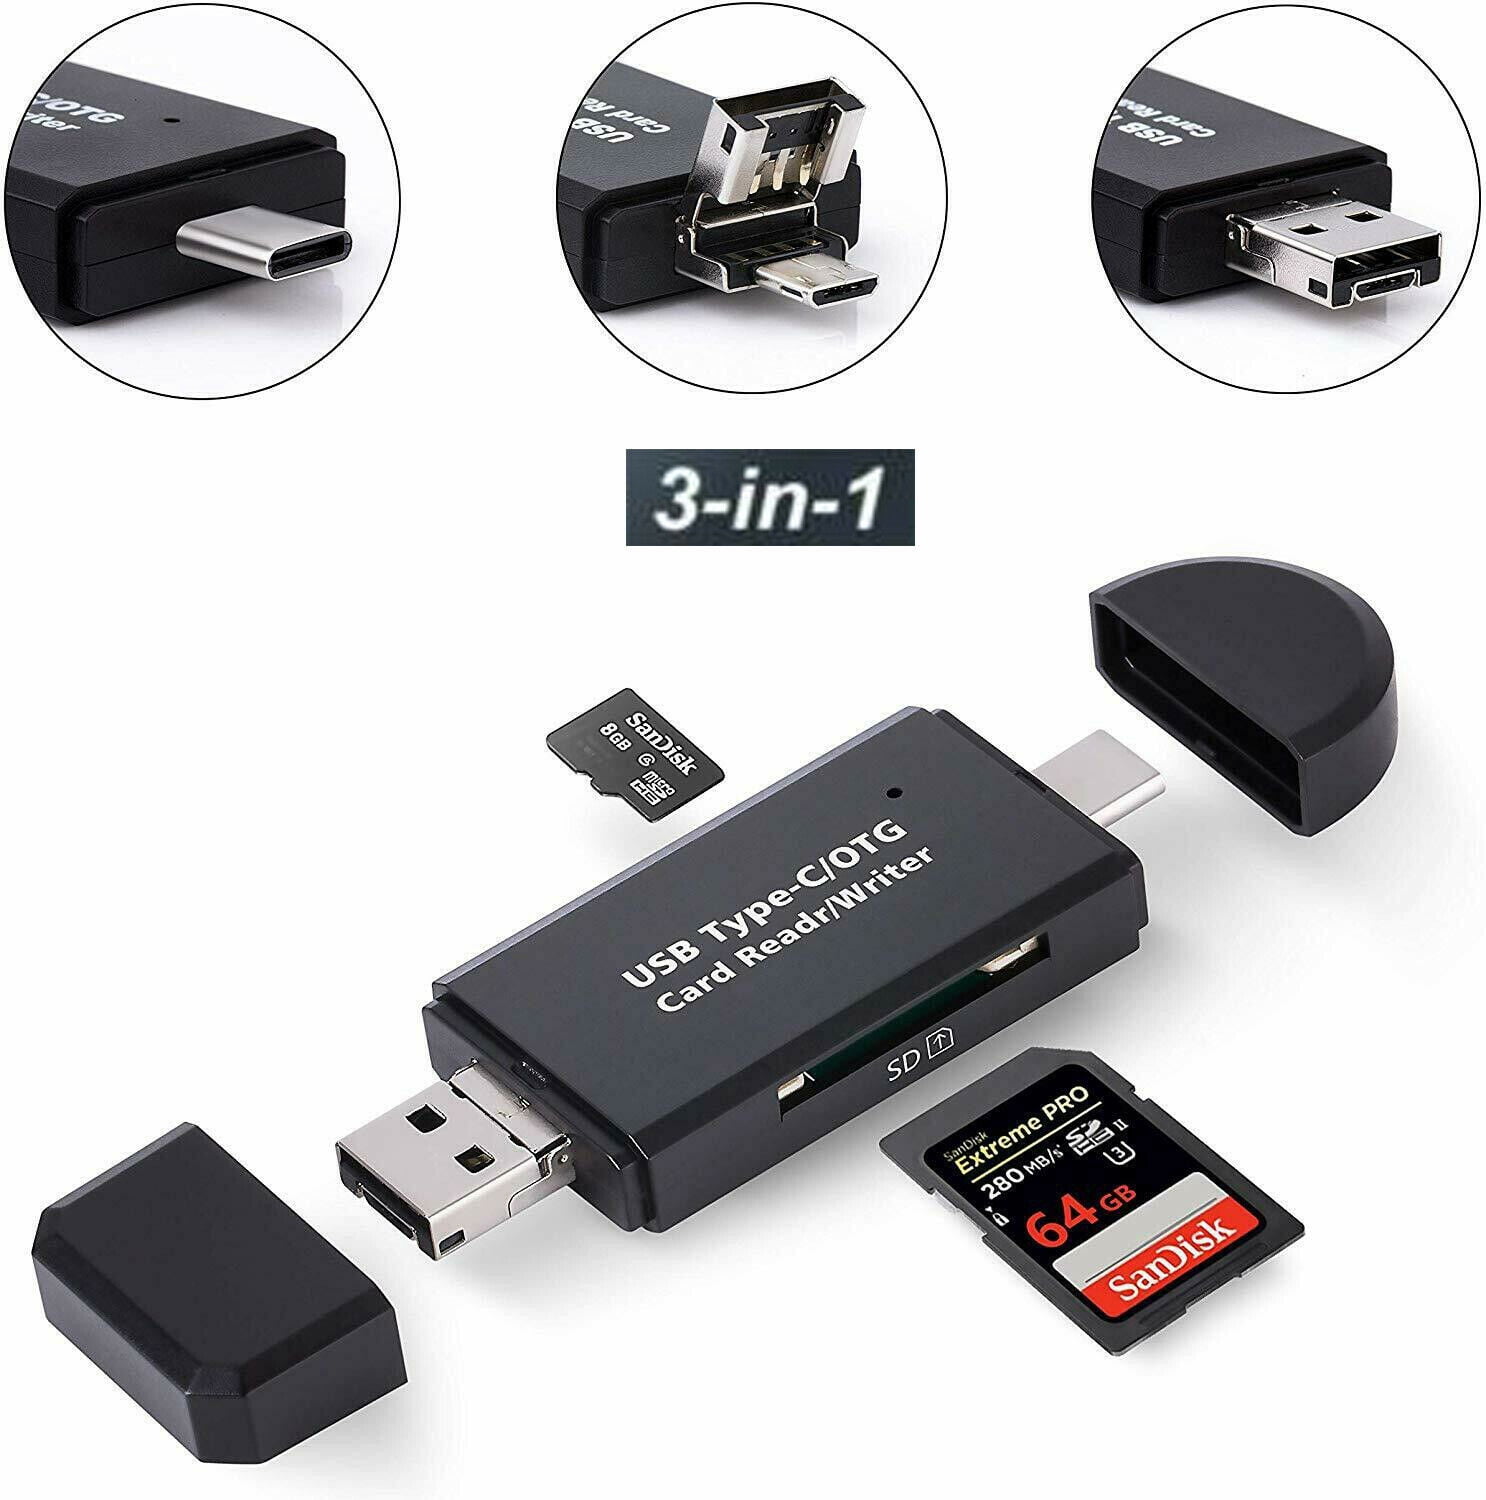 SanFlash PRO USB 3.0 Card Reader Works for Google Pixel 2 XL Adapter to Directly Read at 5Gbps Your MicroSDHC MicroSDXC Cards